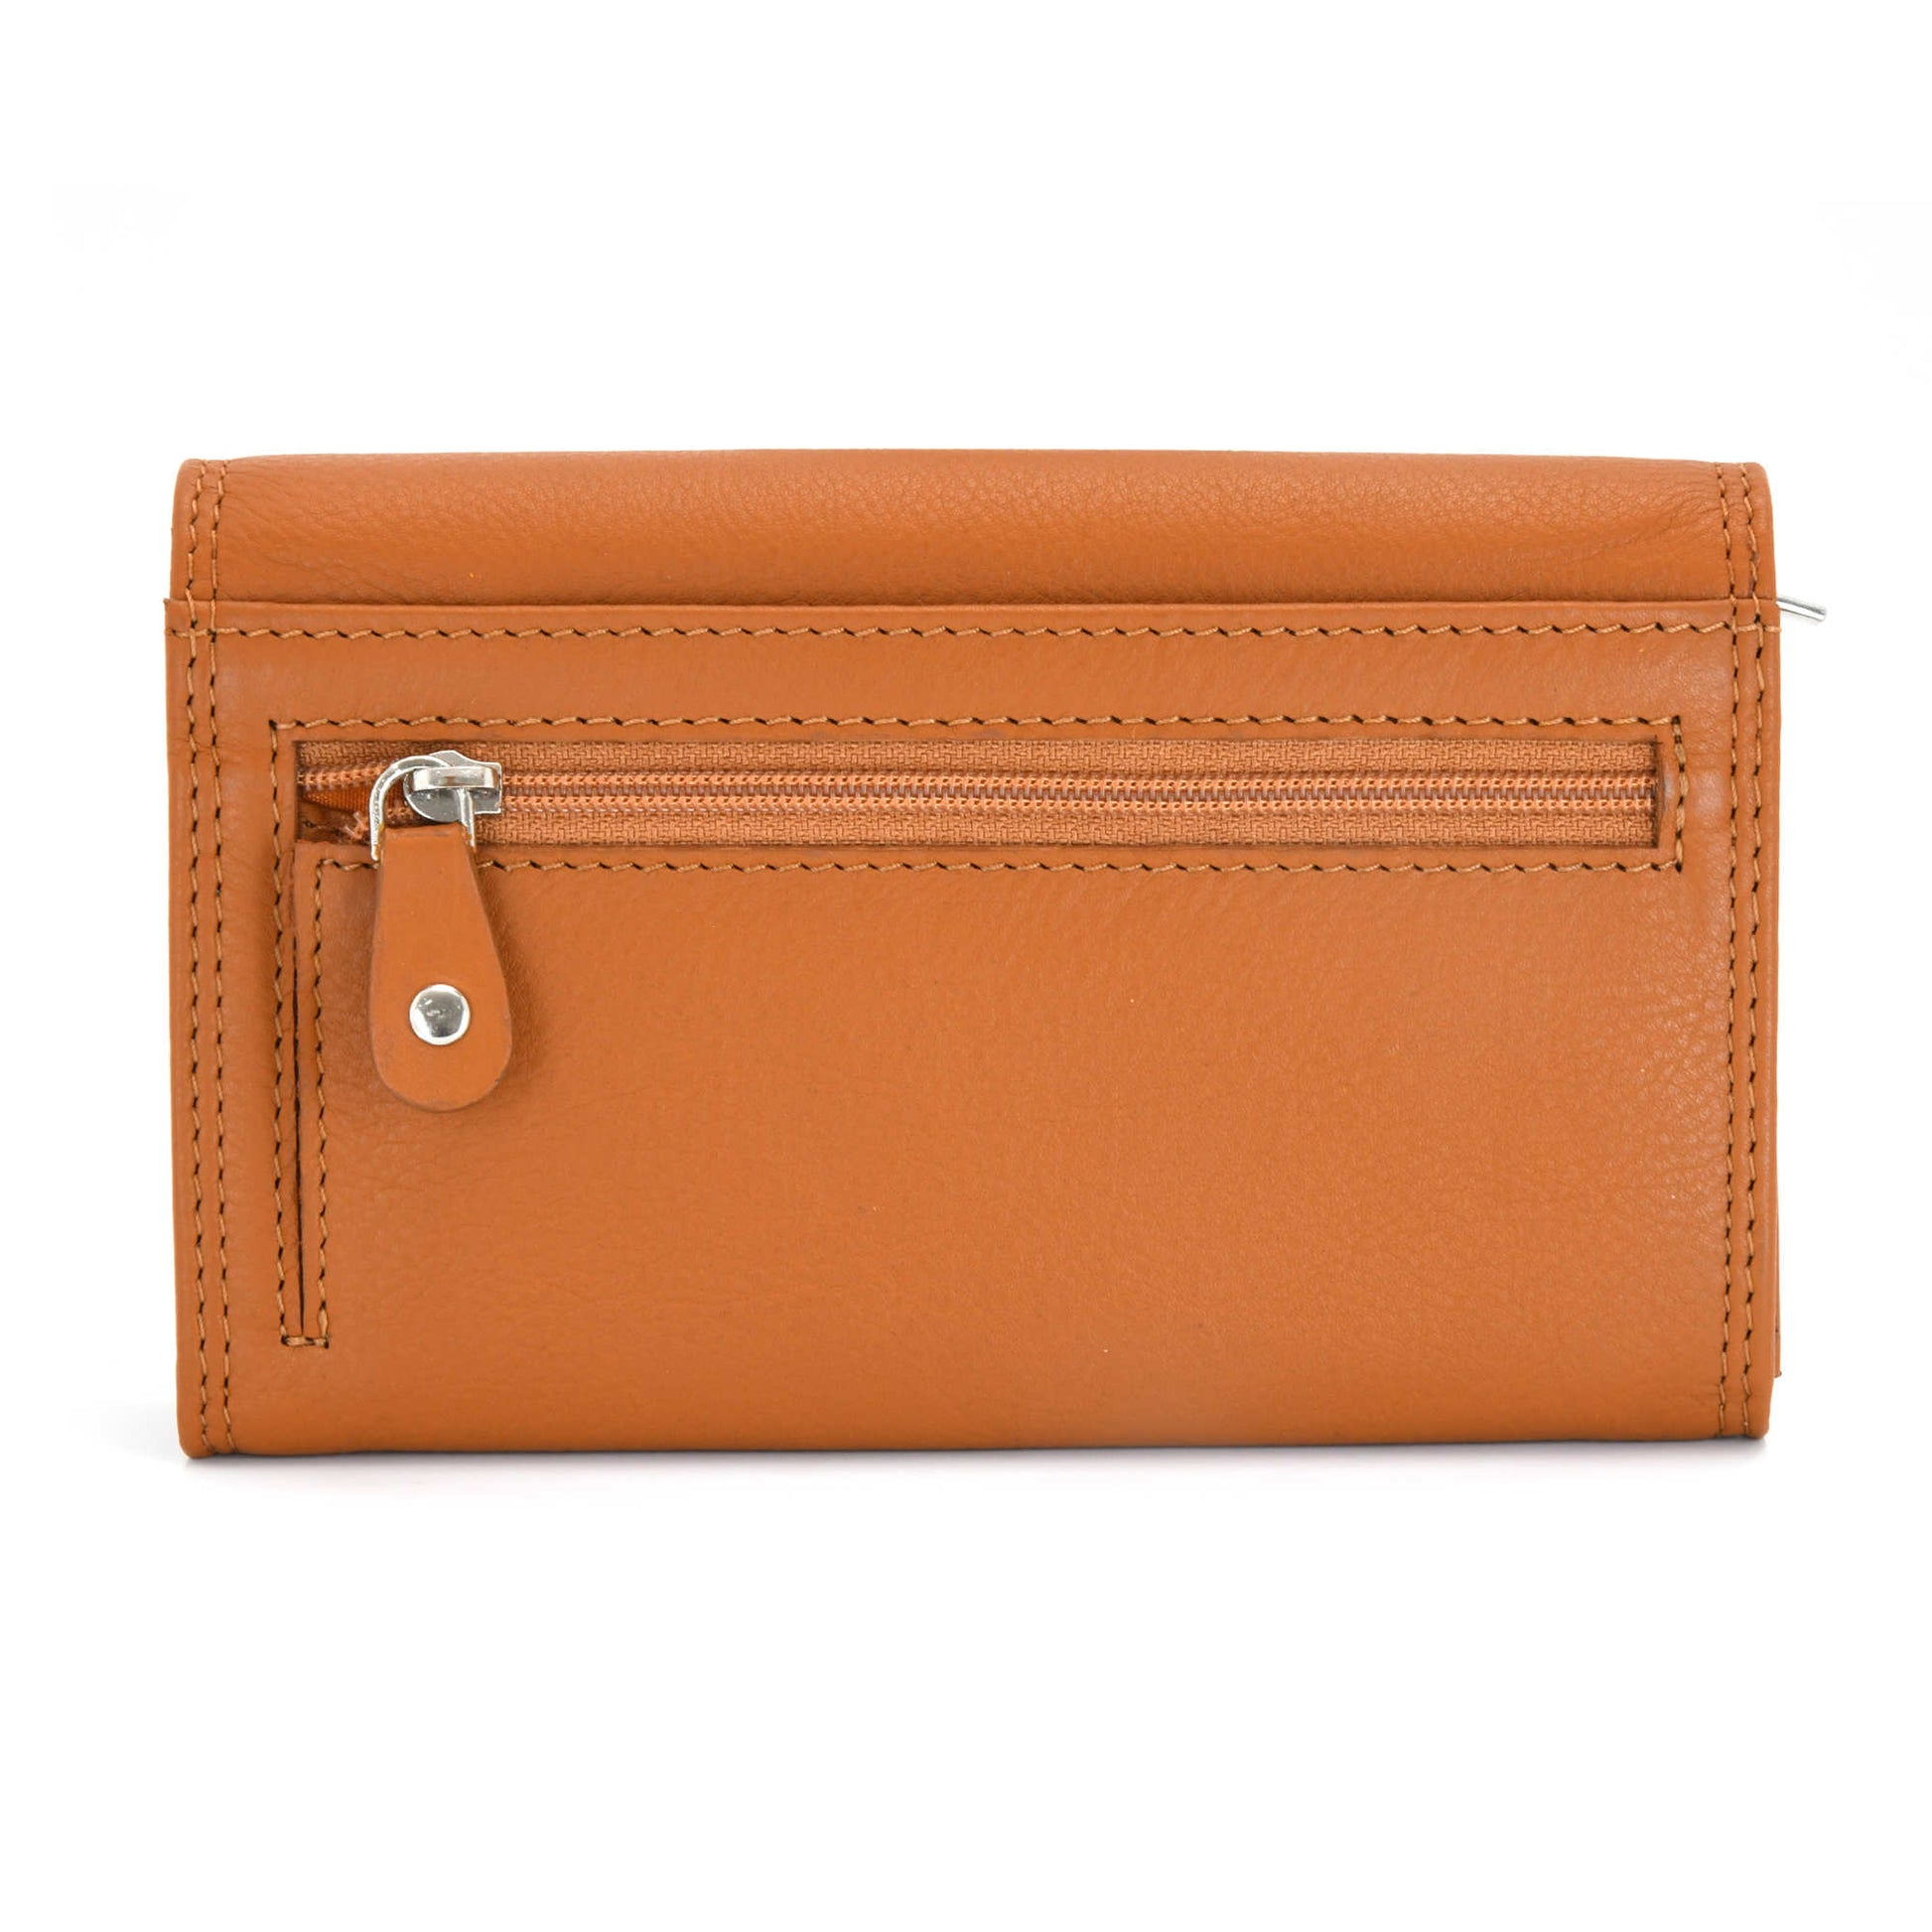 Style n Craft 300953-CG Ladies Clutch Wallet in Leather in Tan Color with RFID Protection - Back closed View